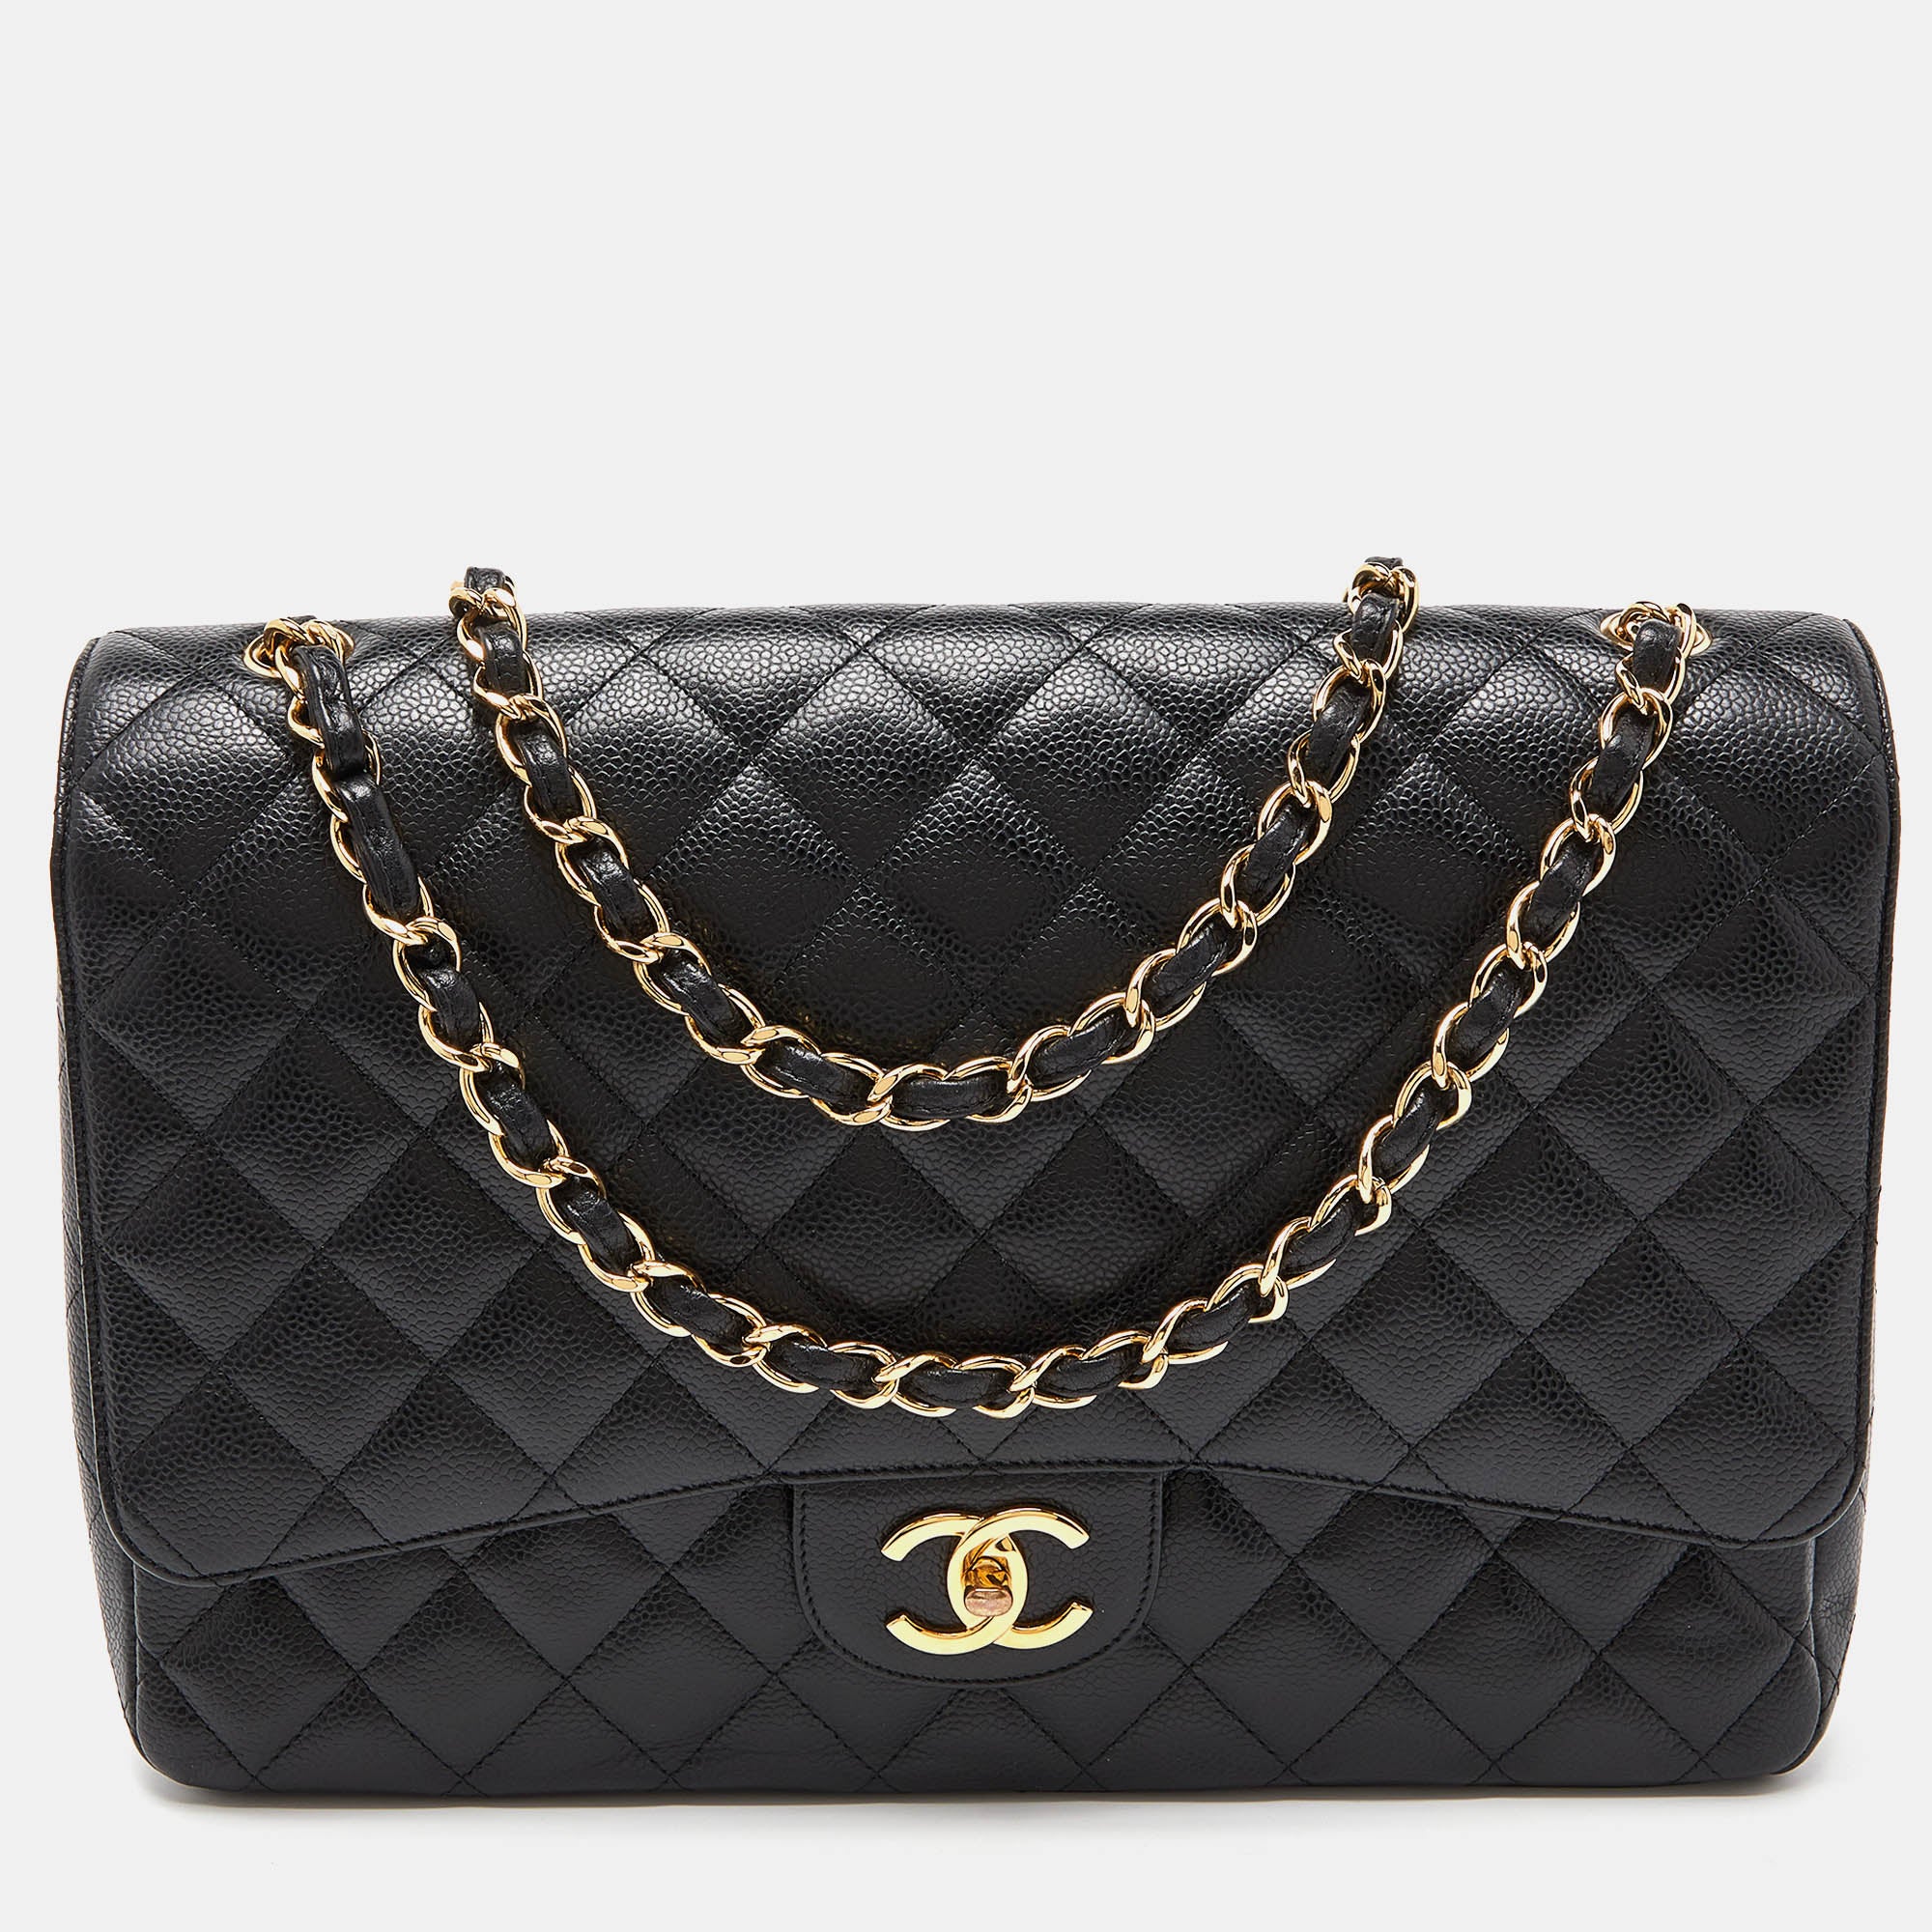 Shop Used Chanel Bag – Page 52